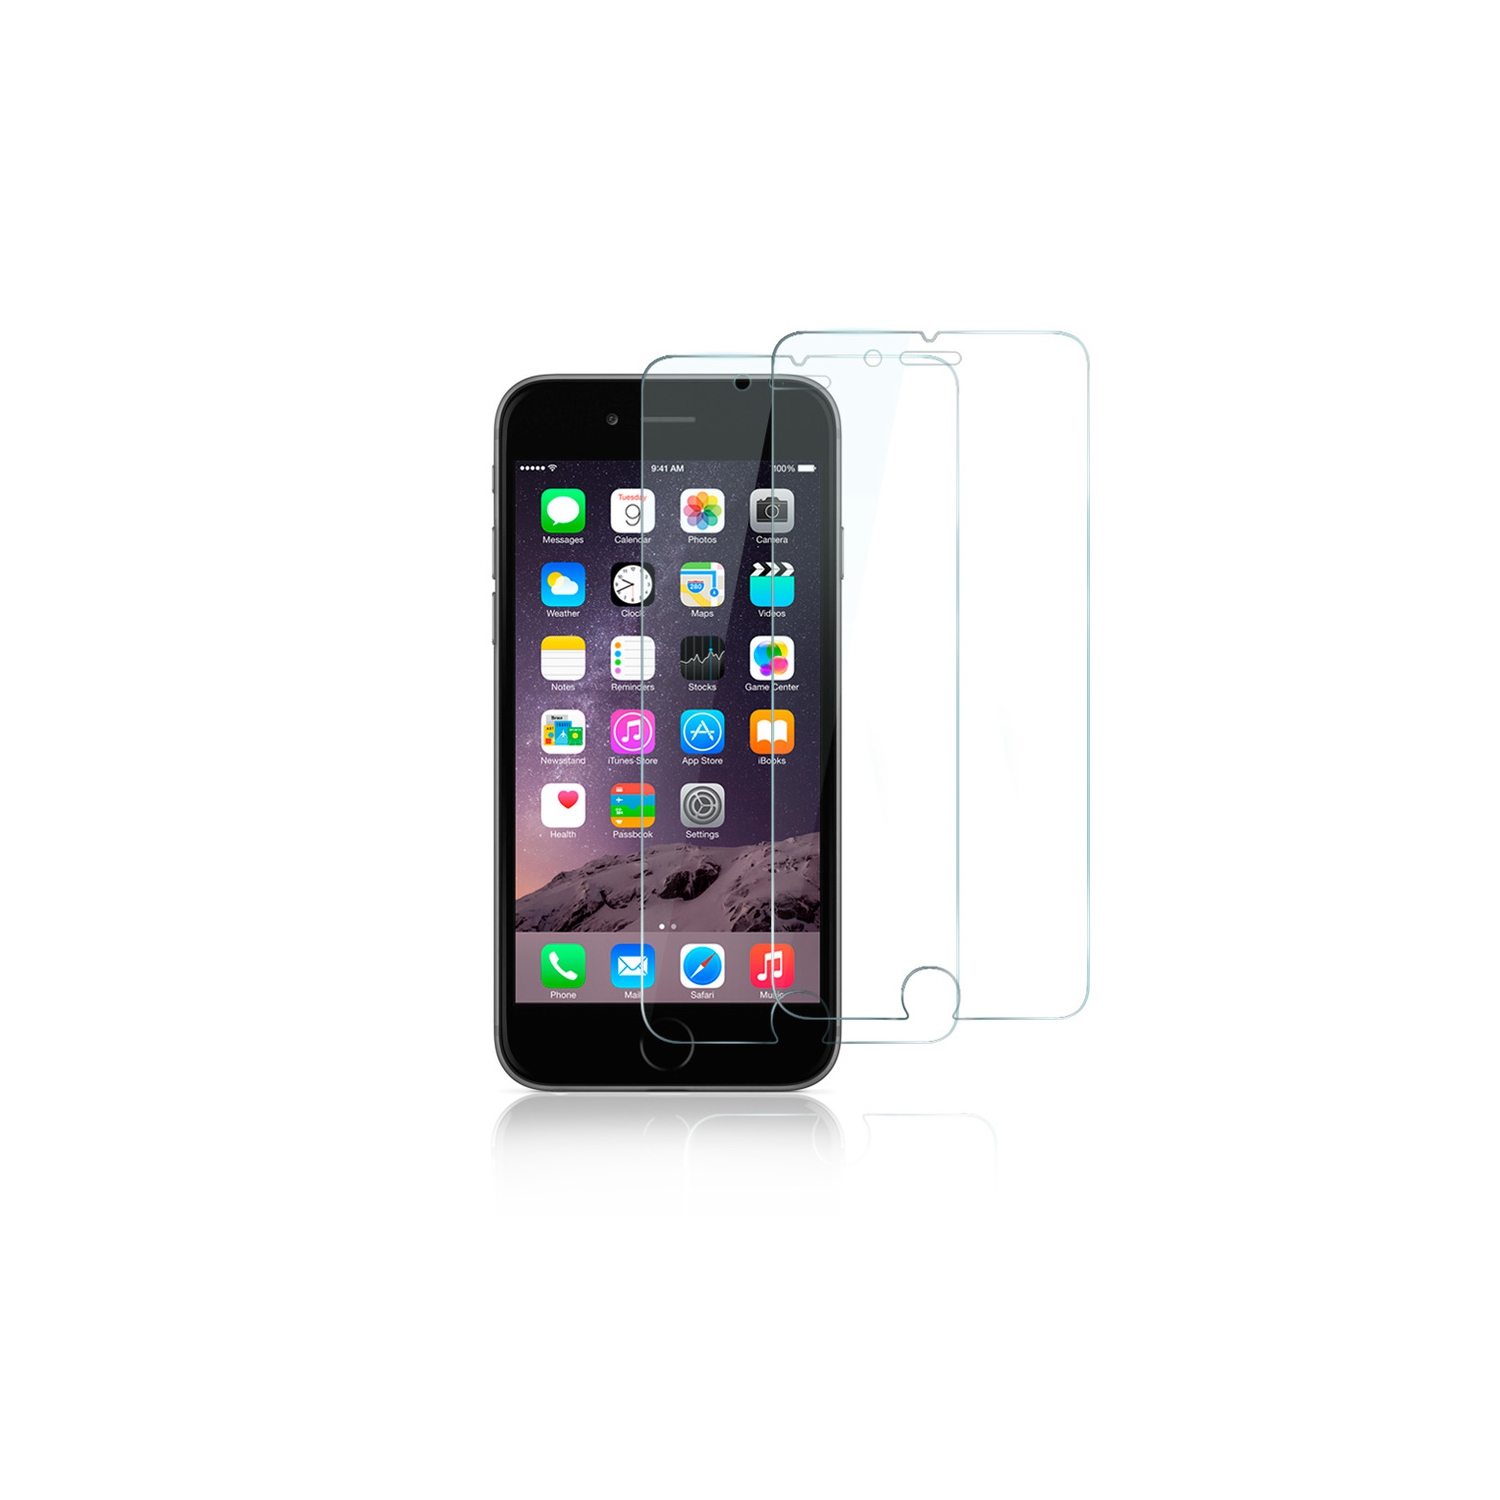 【2 Packs】 CSmart Premium Tempered Glass Screen Protector for iPhone 6 Plus / 6S Plus (5.5"), Case Friendly & Bubble Free